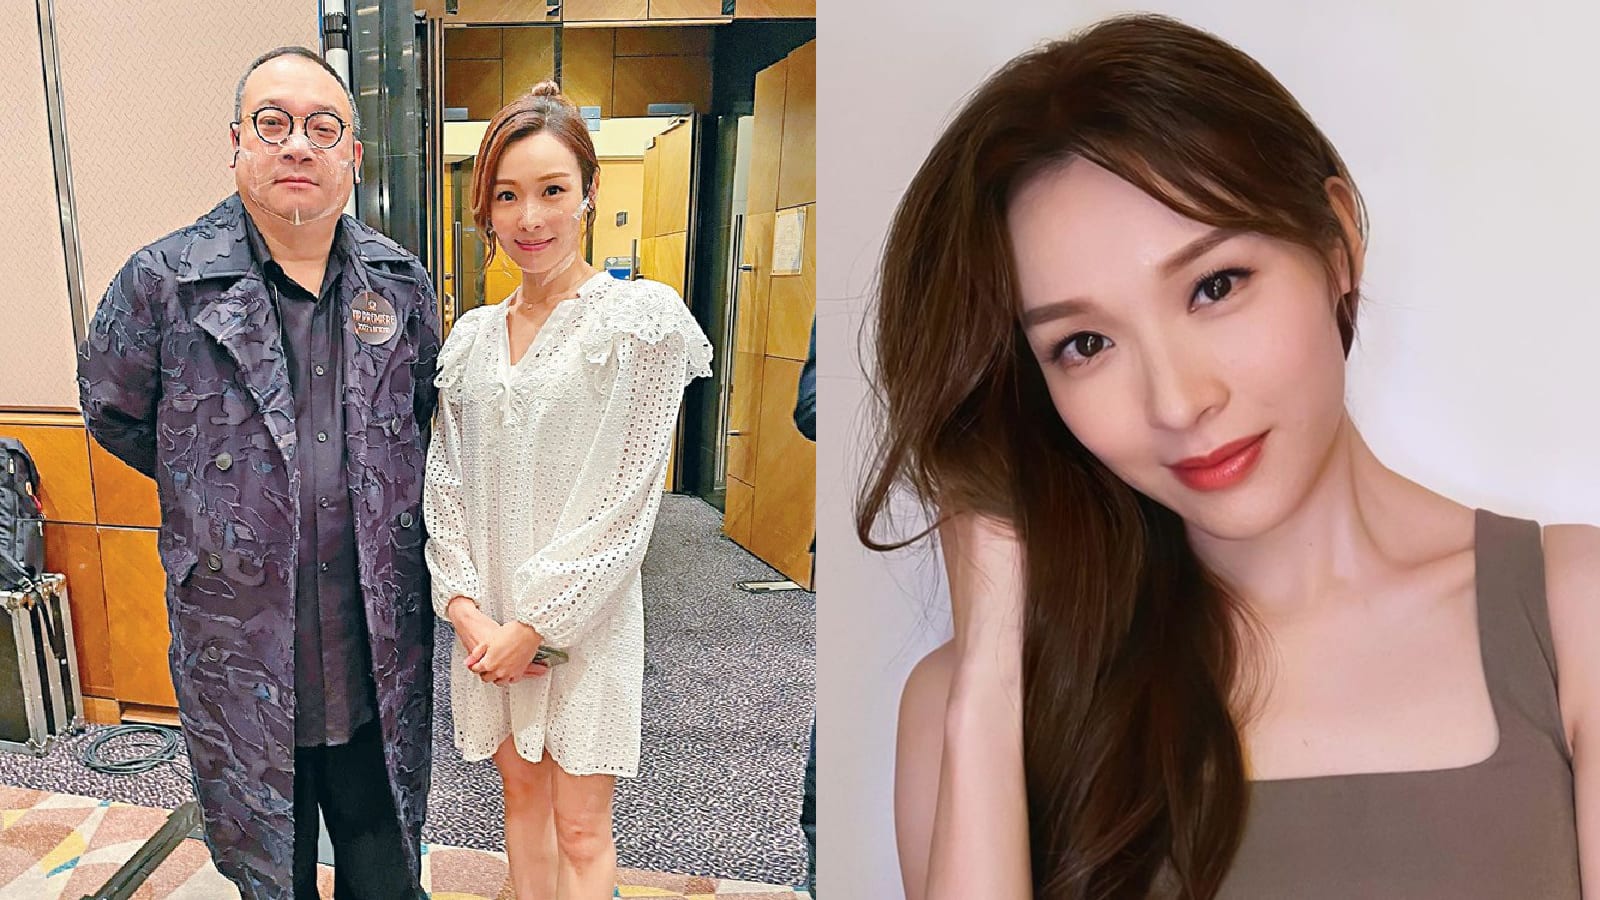 TVB Actress Ali Lee Denies Dating Billionaire After They Were Spotted At A Hotel, Says They Met There To Discuss Work